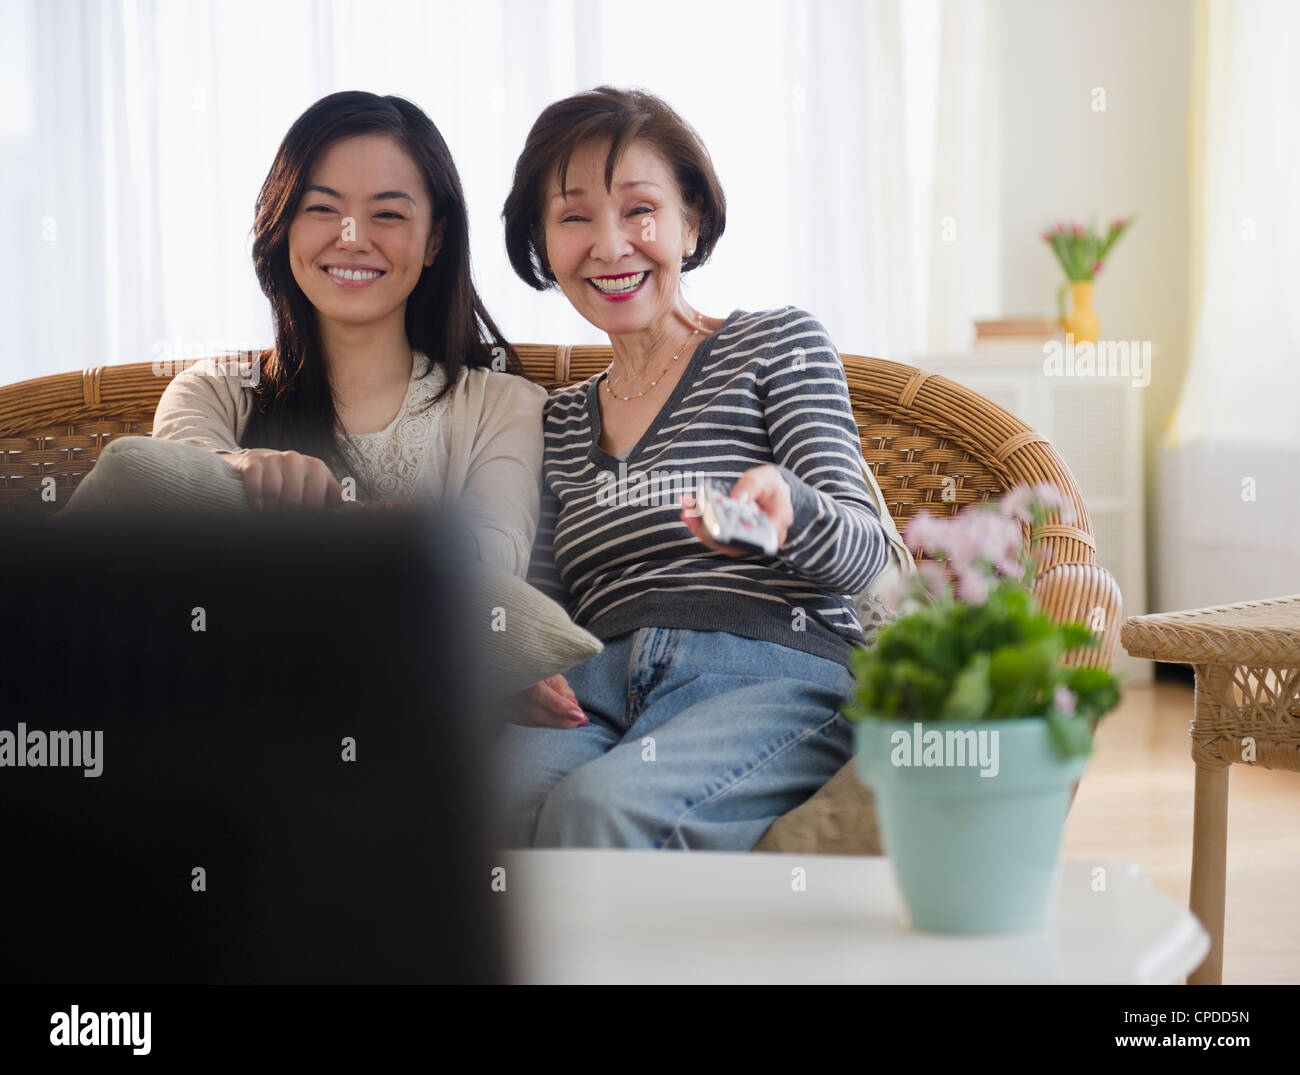 Japanese mother and daughter watching television Stock Photo